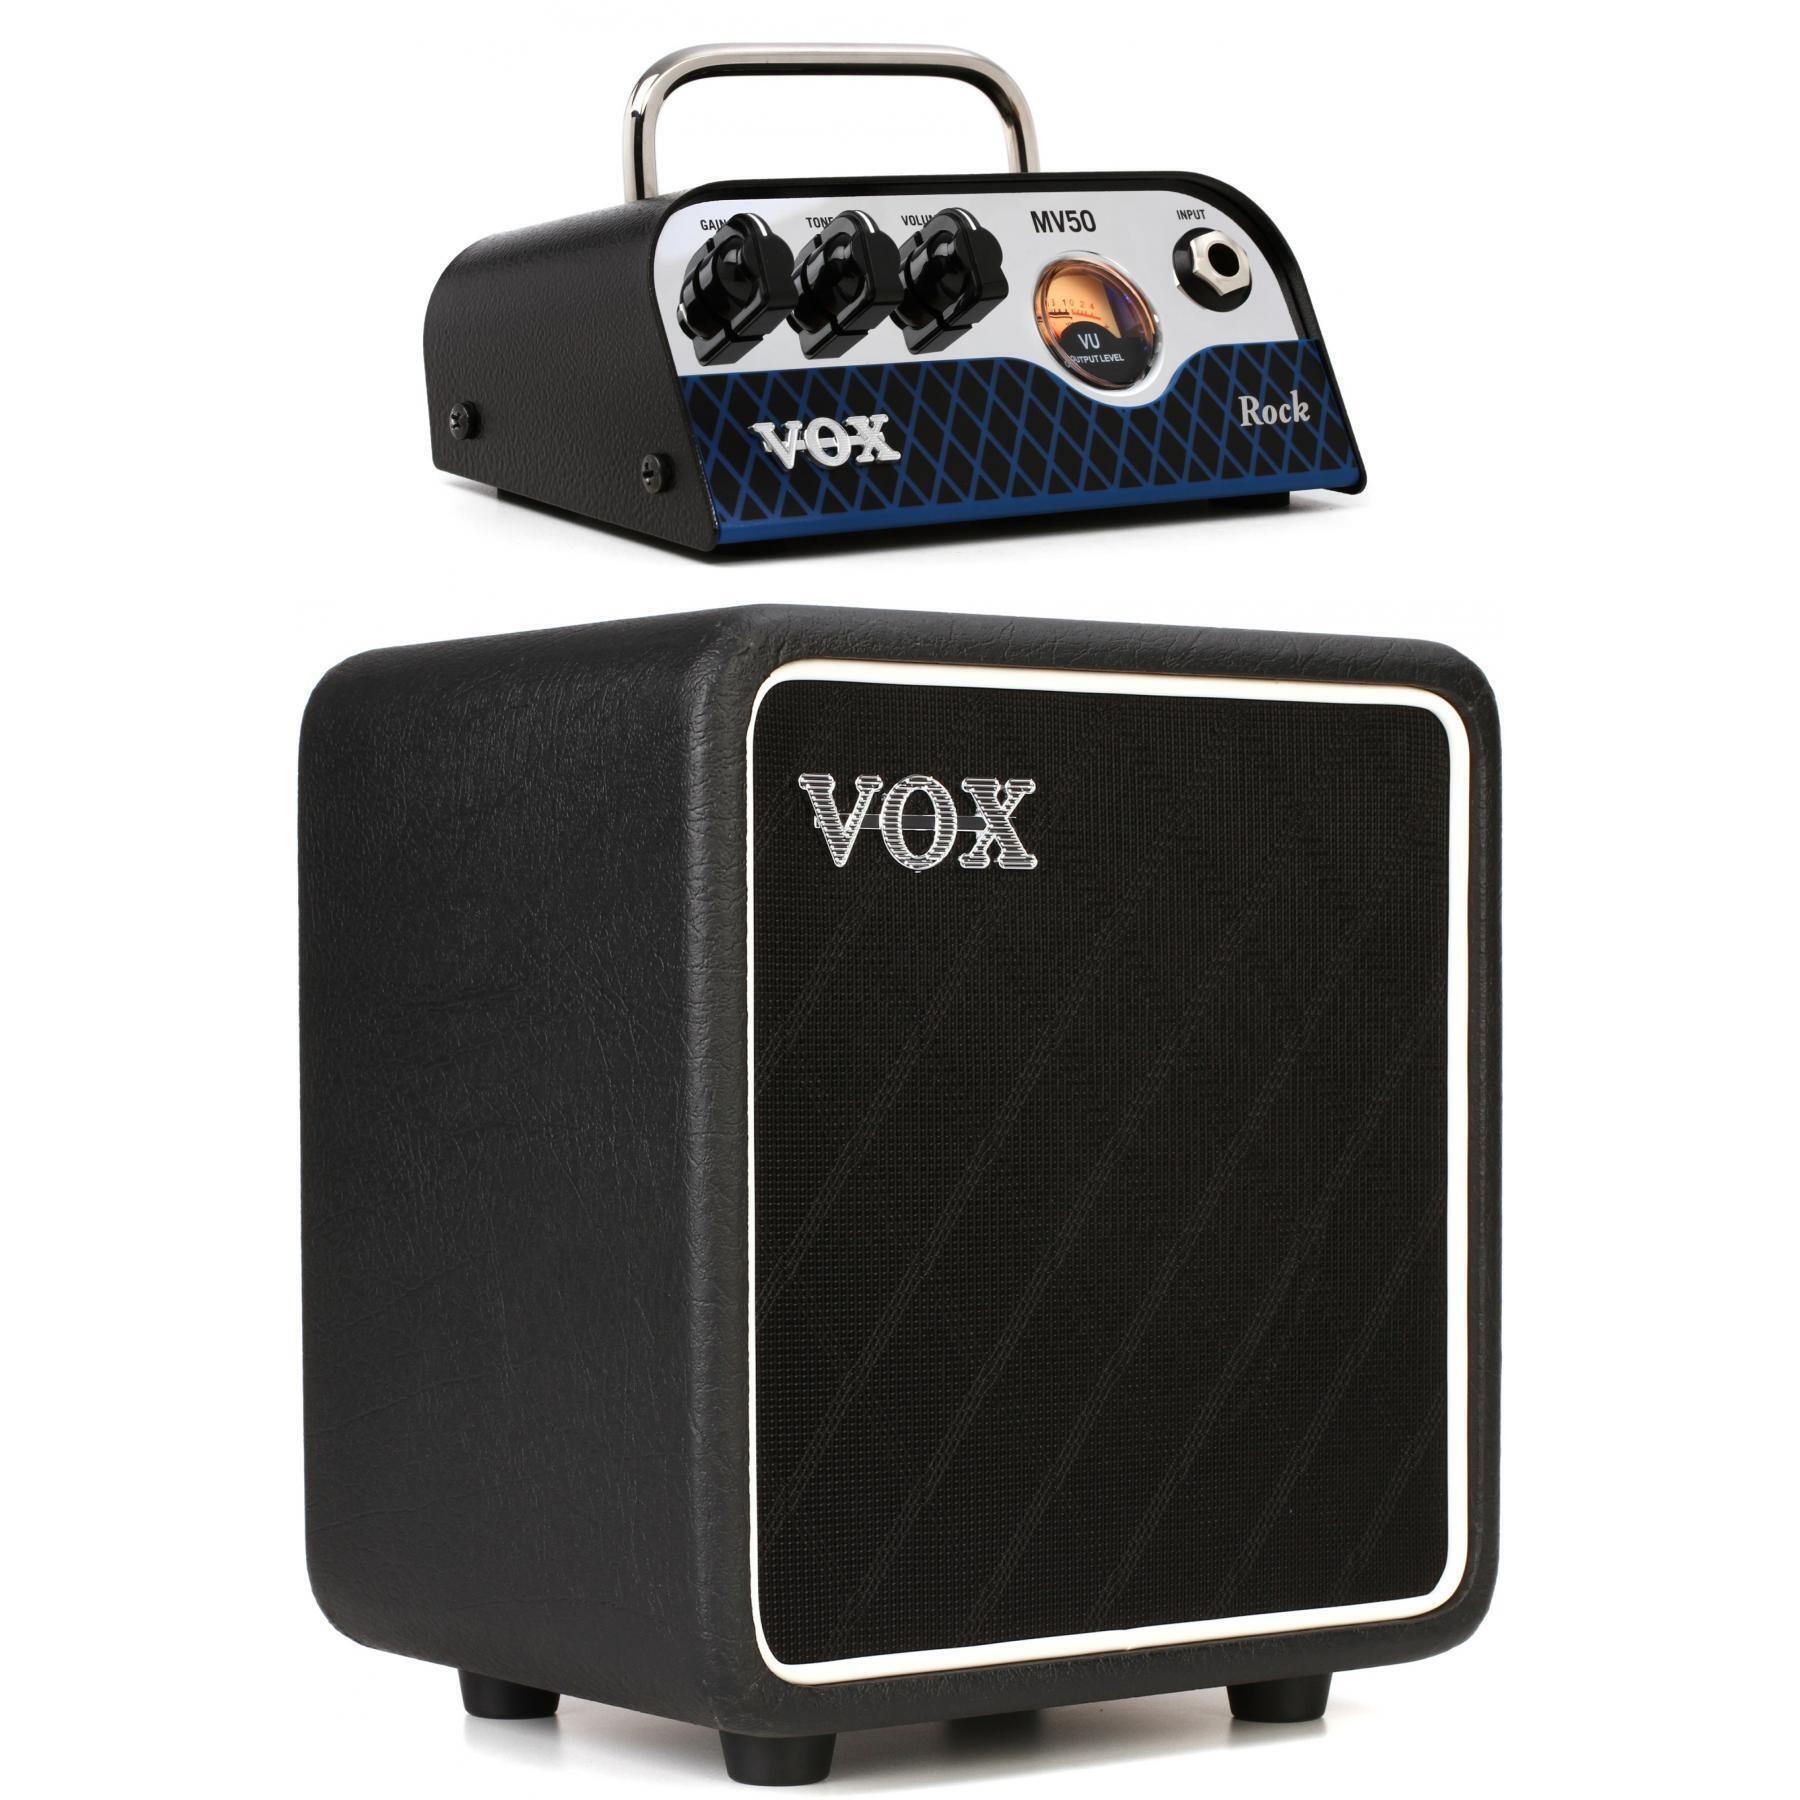 Vox MV50 Rock Hybrid Tube Head with 1x8 Cabinet | Sweetwater